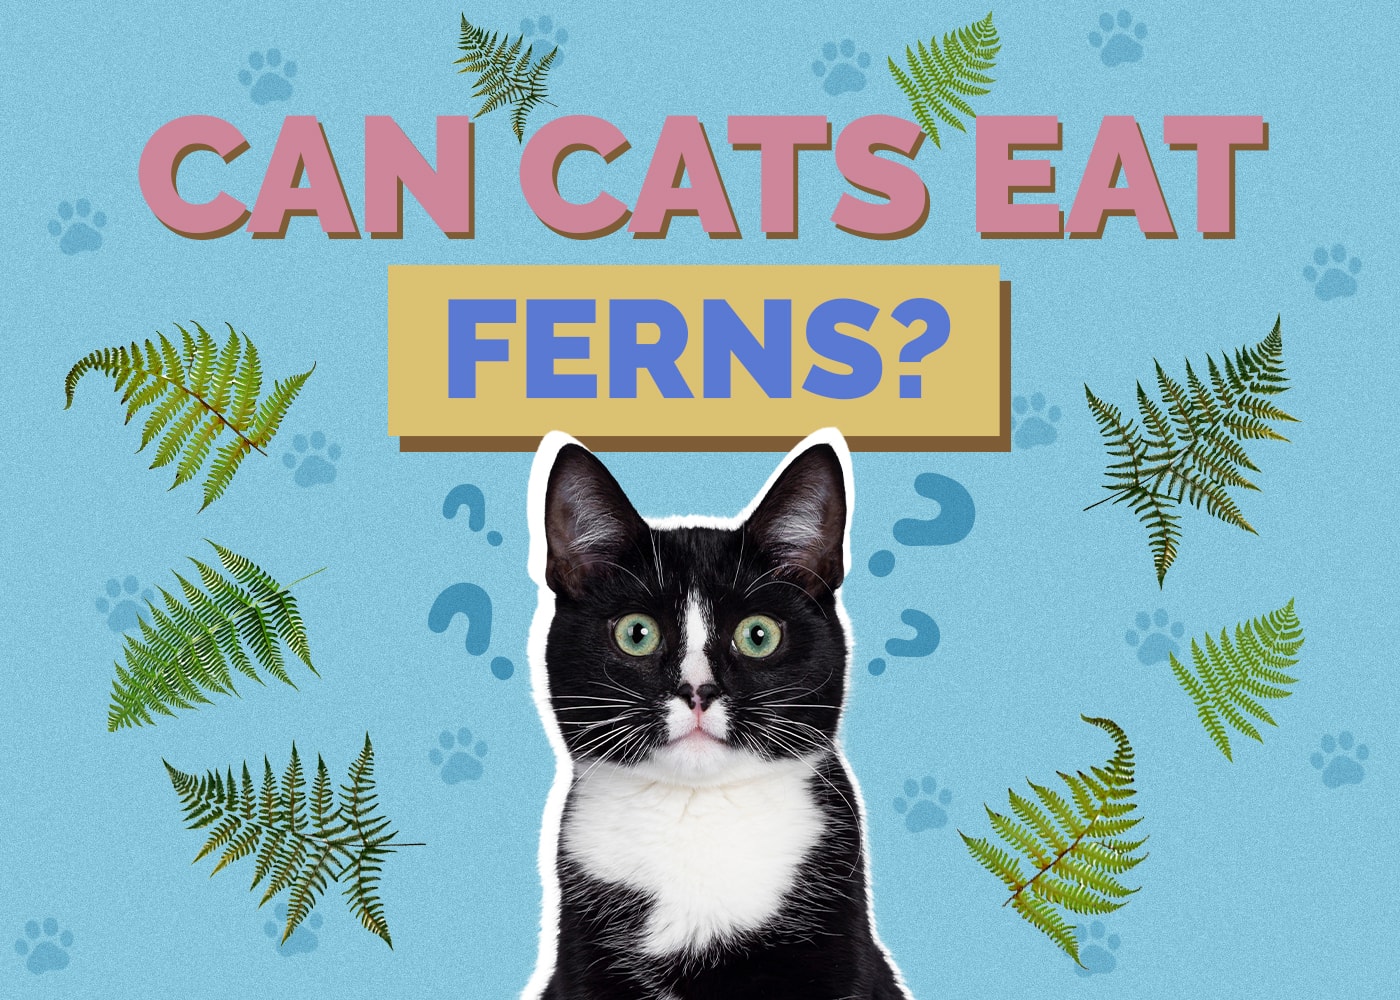 Can Cats Eat ferns